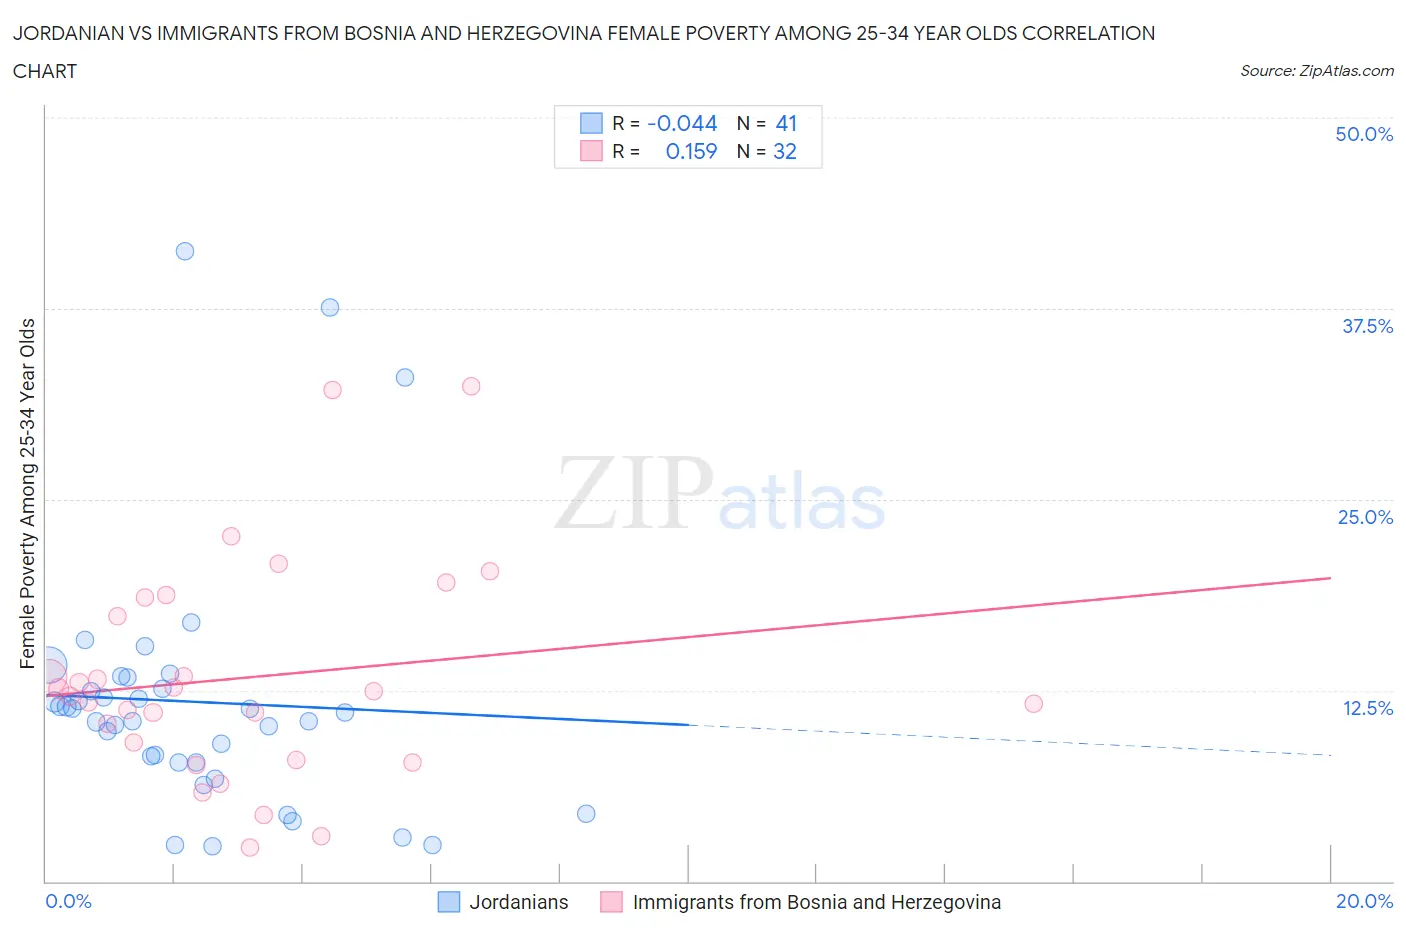 Jordanian vs Immigrants from Bosnia and Herzegovina Female Poverty Among 25-34 Year Olds